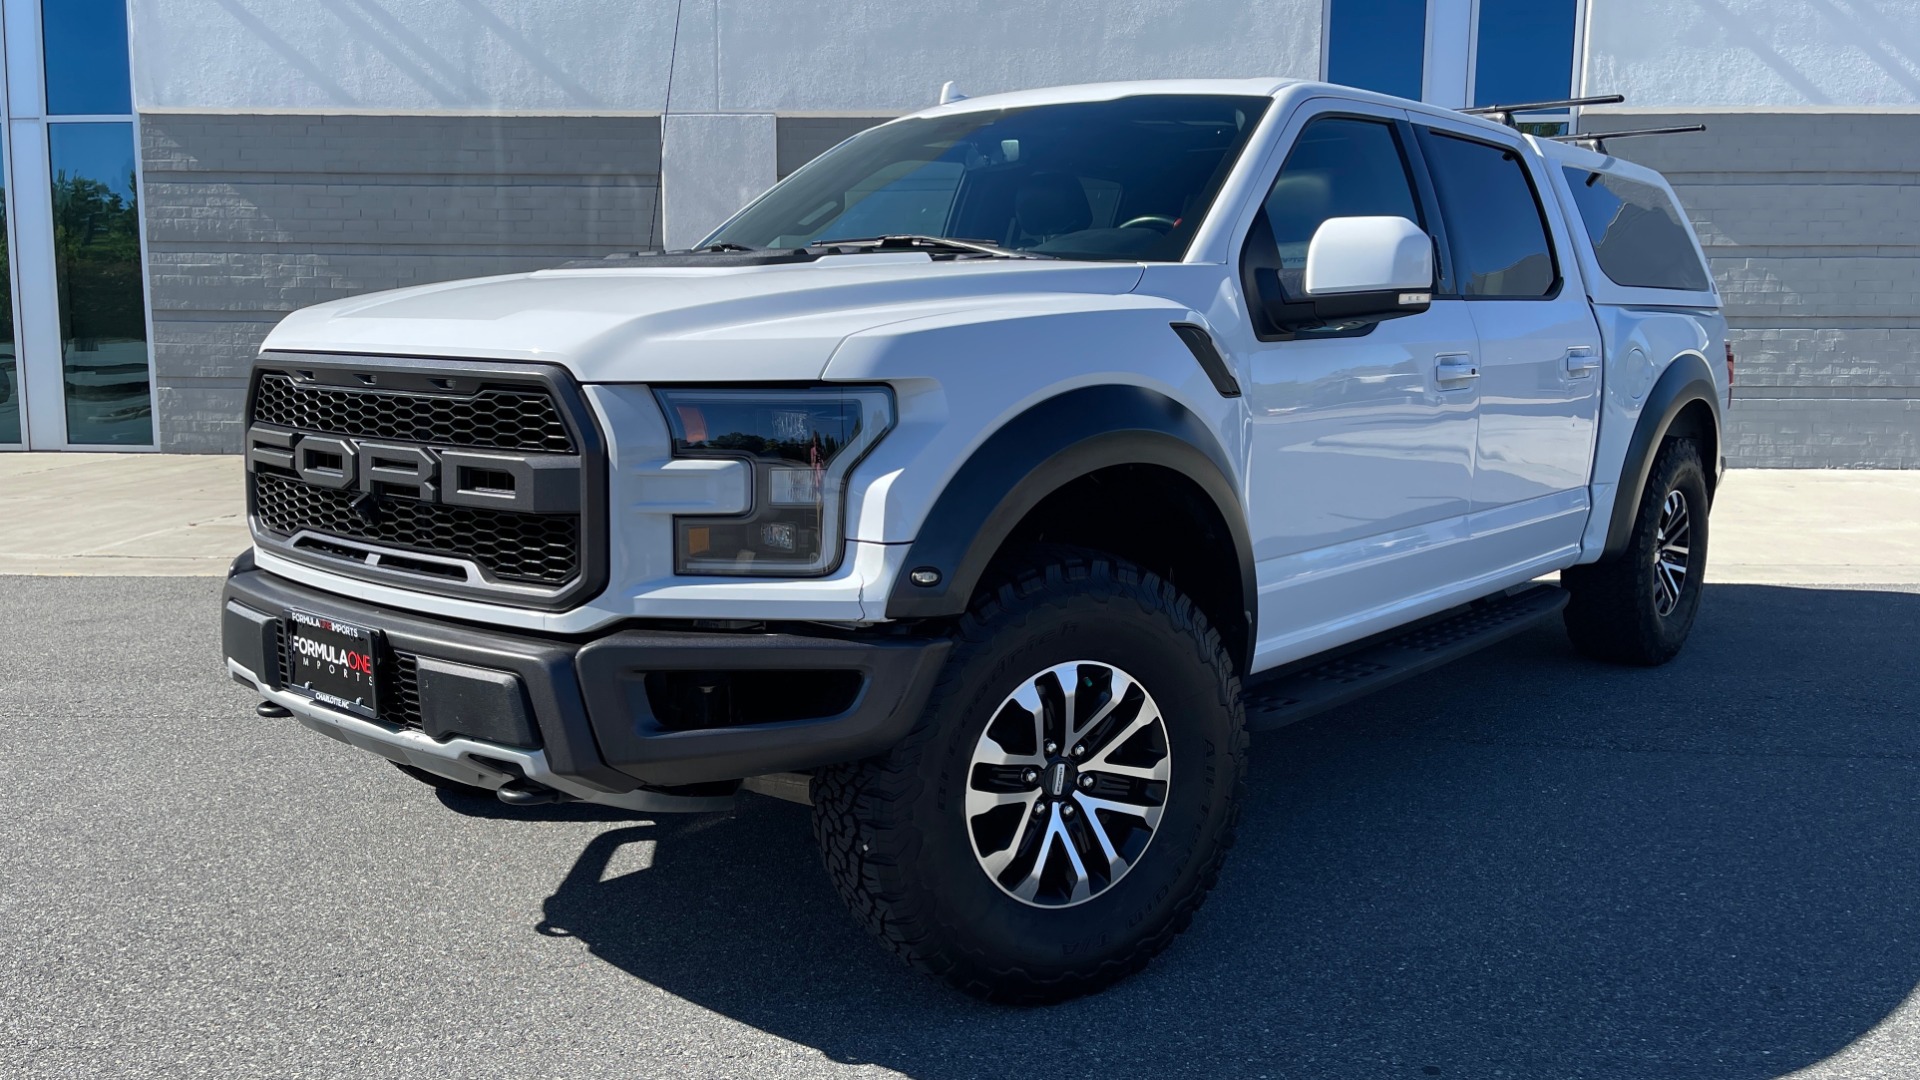 Used 2019 Ford F-150 RAPTOR 4X4 SUPERCREW / NAV / BLIS / B&O SND / REMOTE START / REARVIEW for sale Sold at Formula Imports in Charlotte NC 28227 1